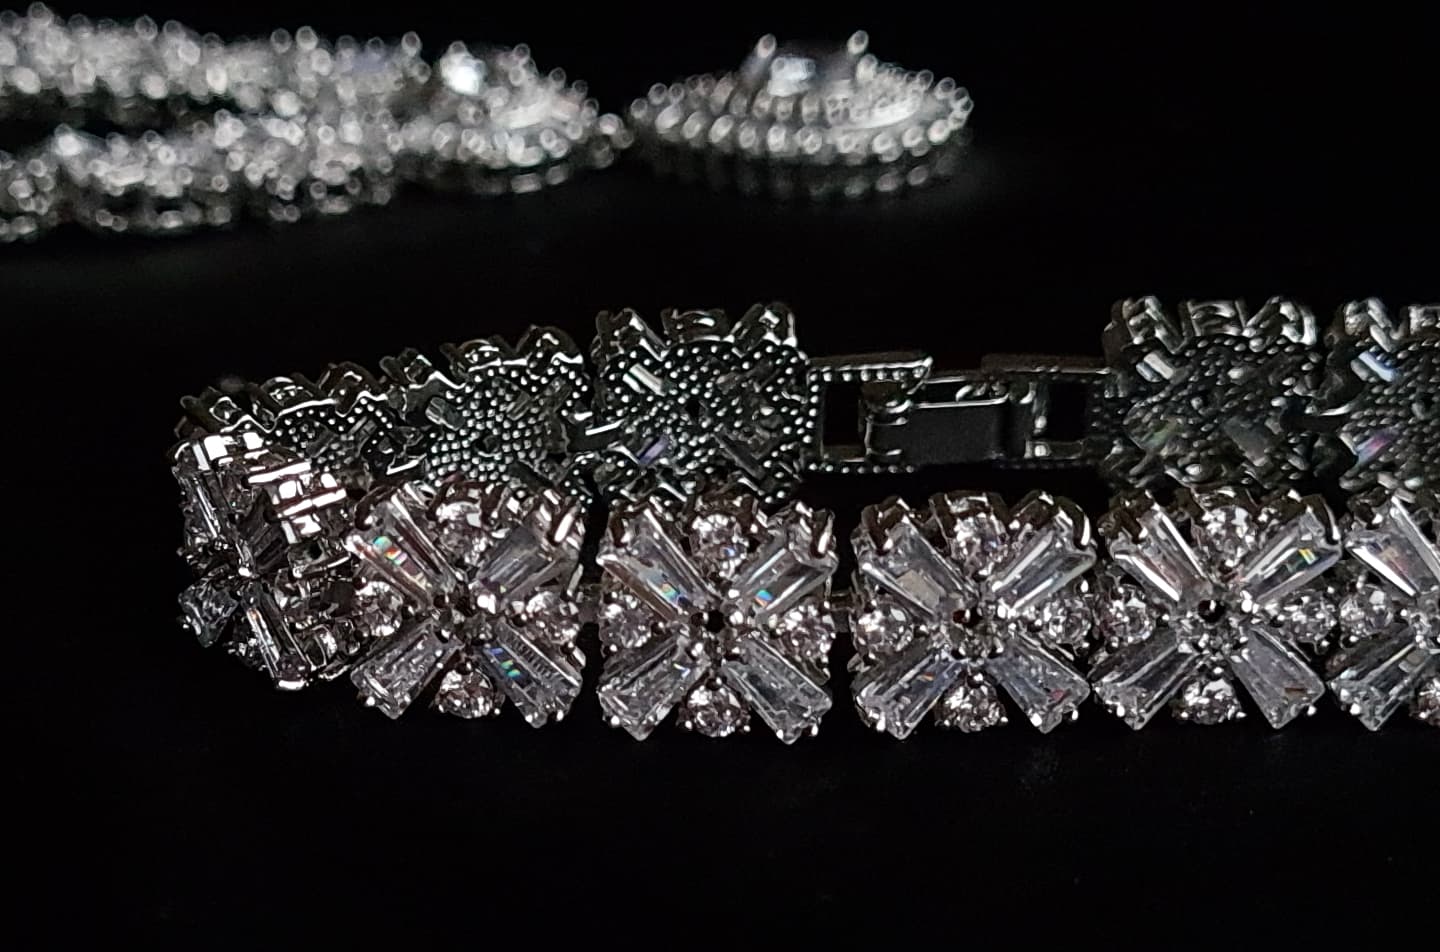  A close-up of a diamond bracelet on a black background. The bracelet is made of silver and has diamonds encrusted on it. The diamonds are sparkling and the bracelet is very shiny.